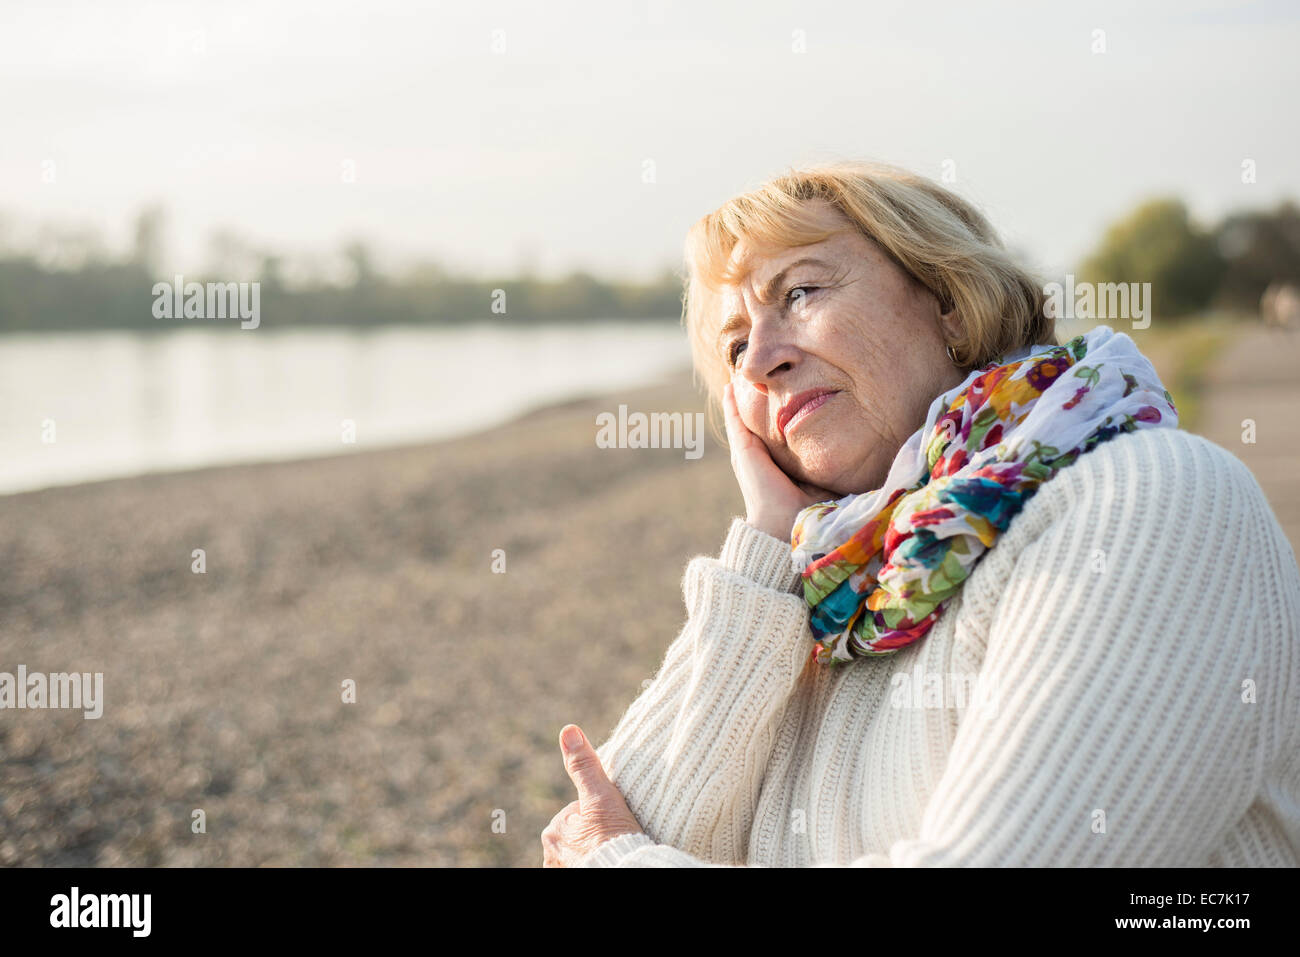 Portrait of pensive senior woman with colourful scarf Stock Photo